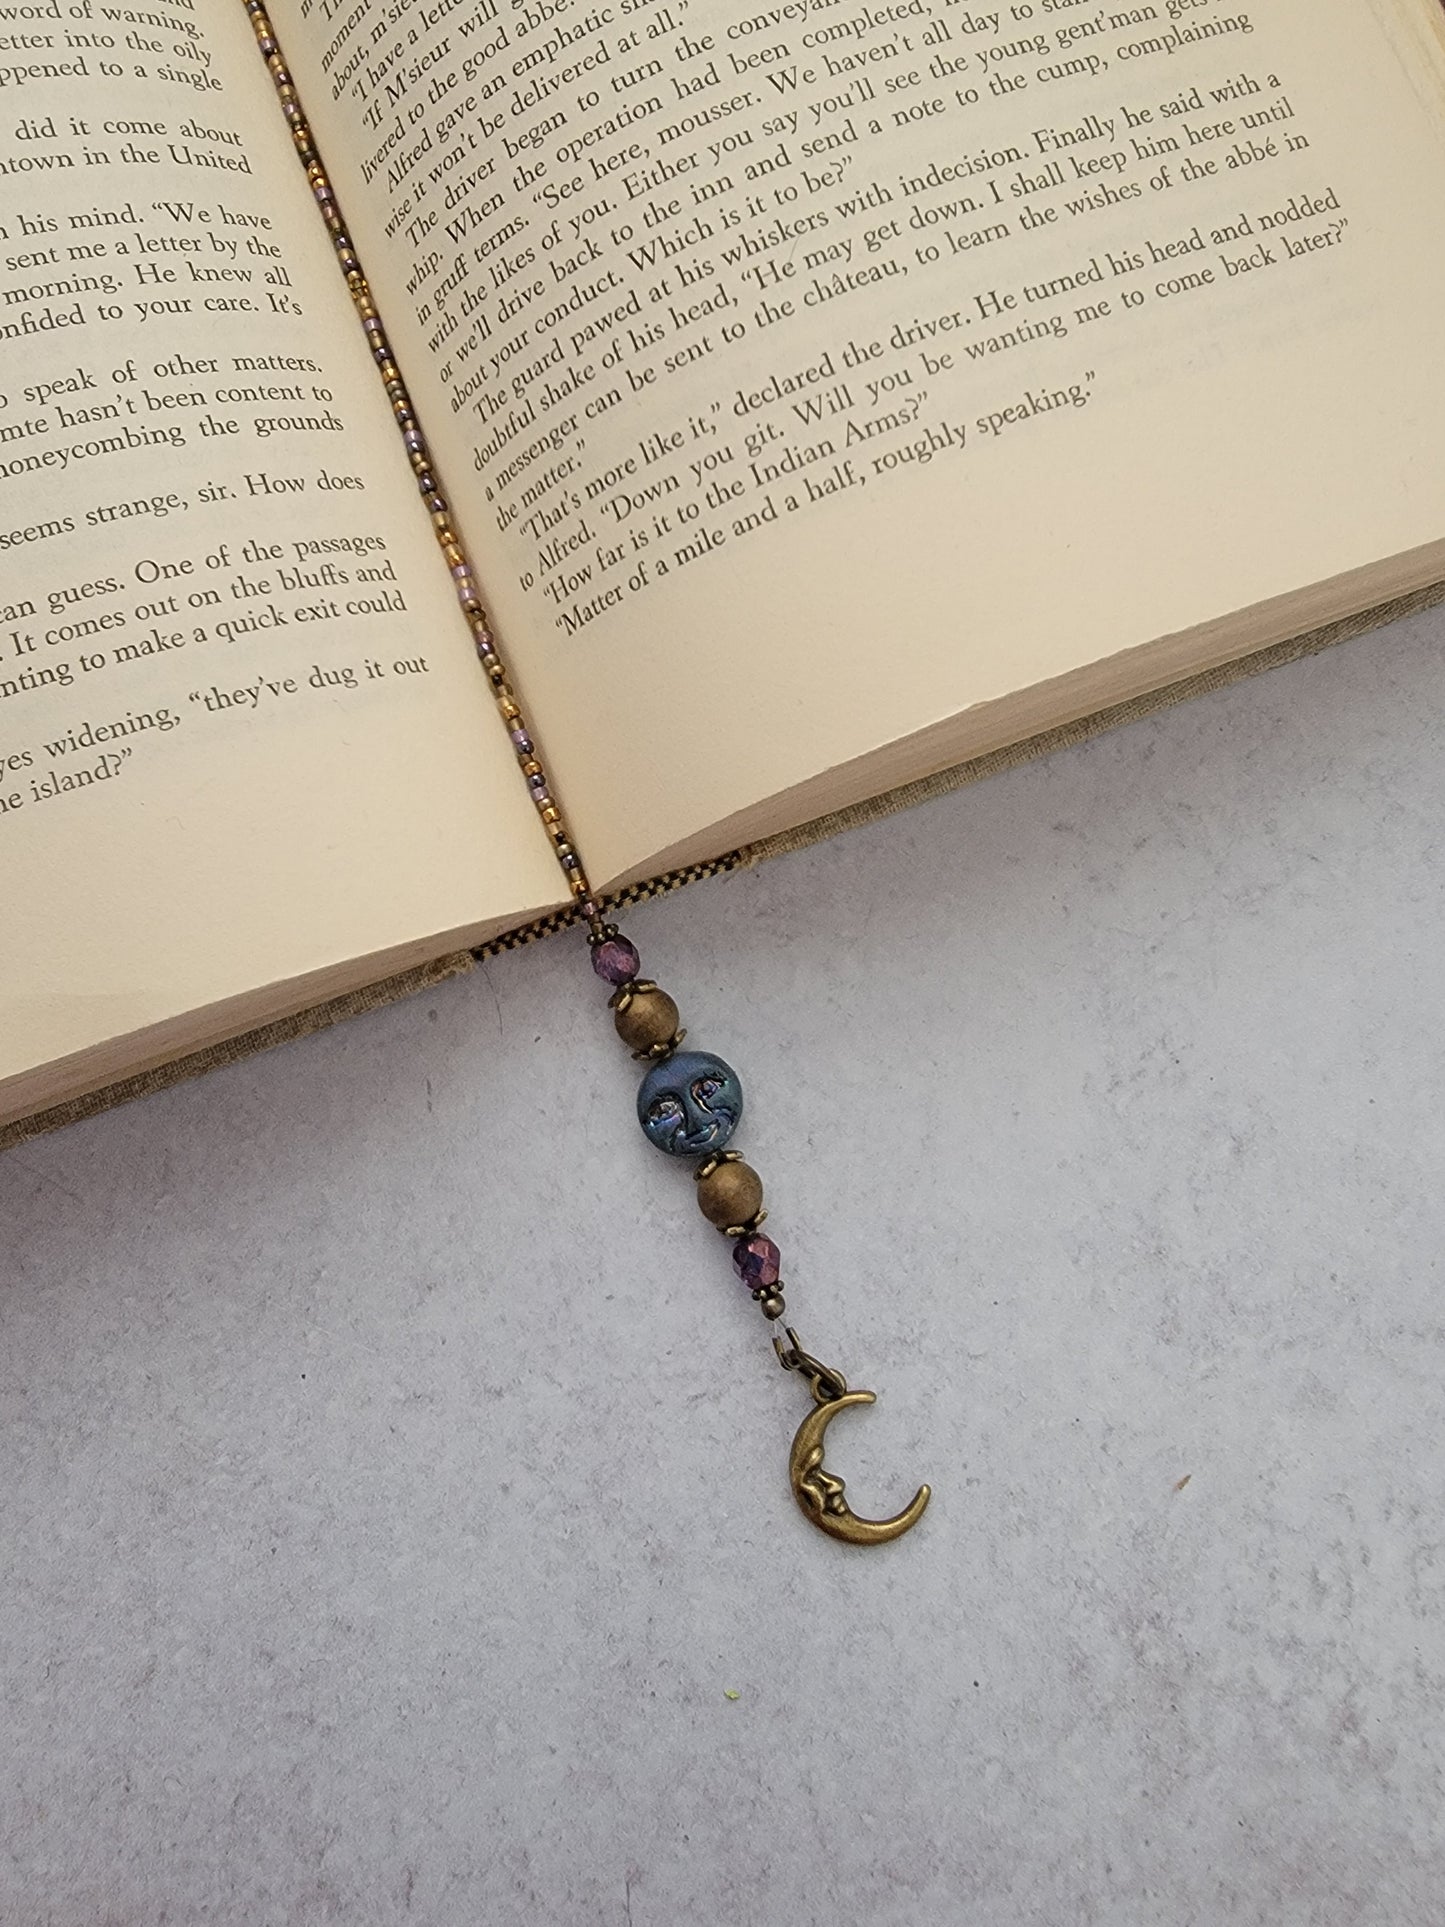 Man in the Moon Bookmark